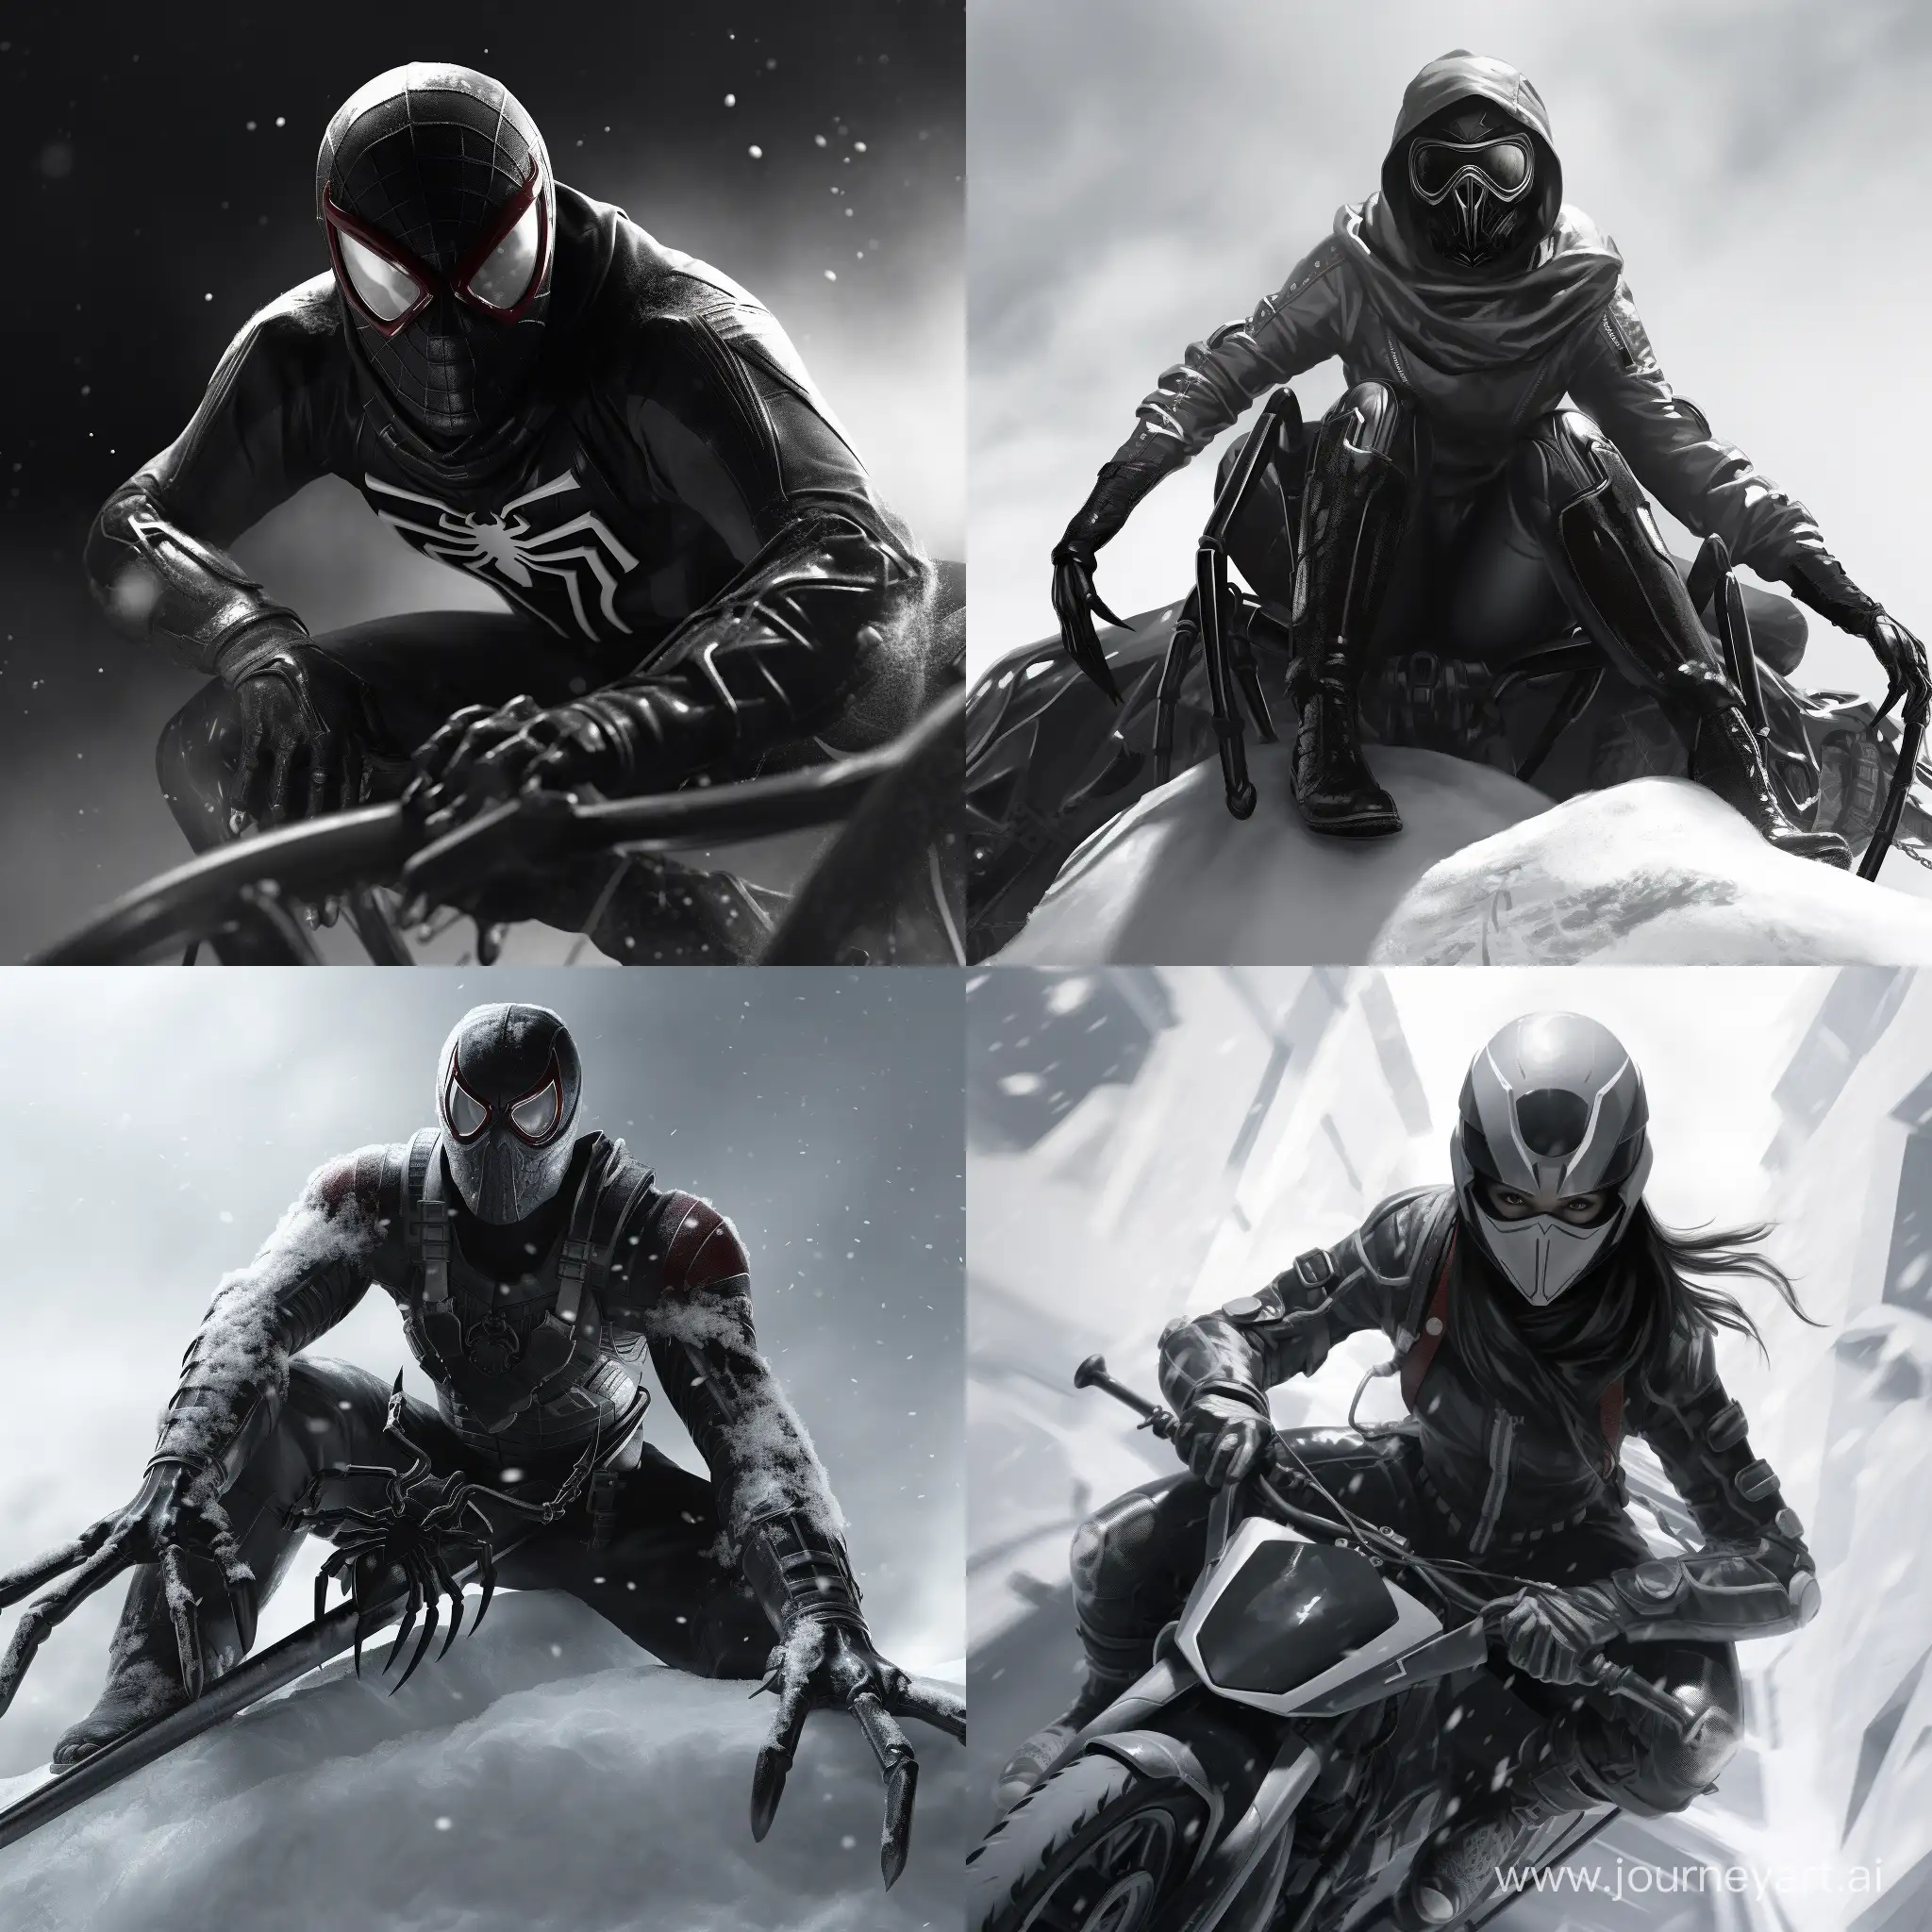 an adult in a black and white helmet posing for a photo while riding a snow - board, spider, cgsociety, Guan Liang, Noir, concept art, photorealism, Hyper Realistic